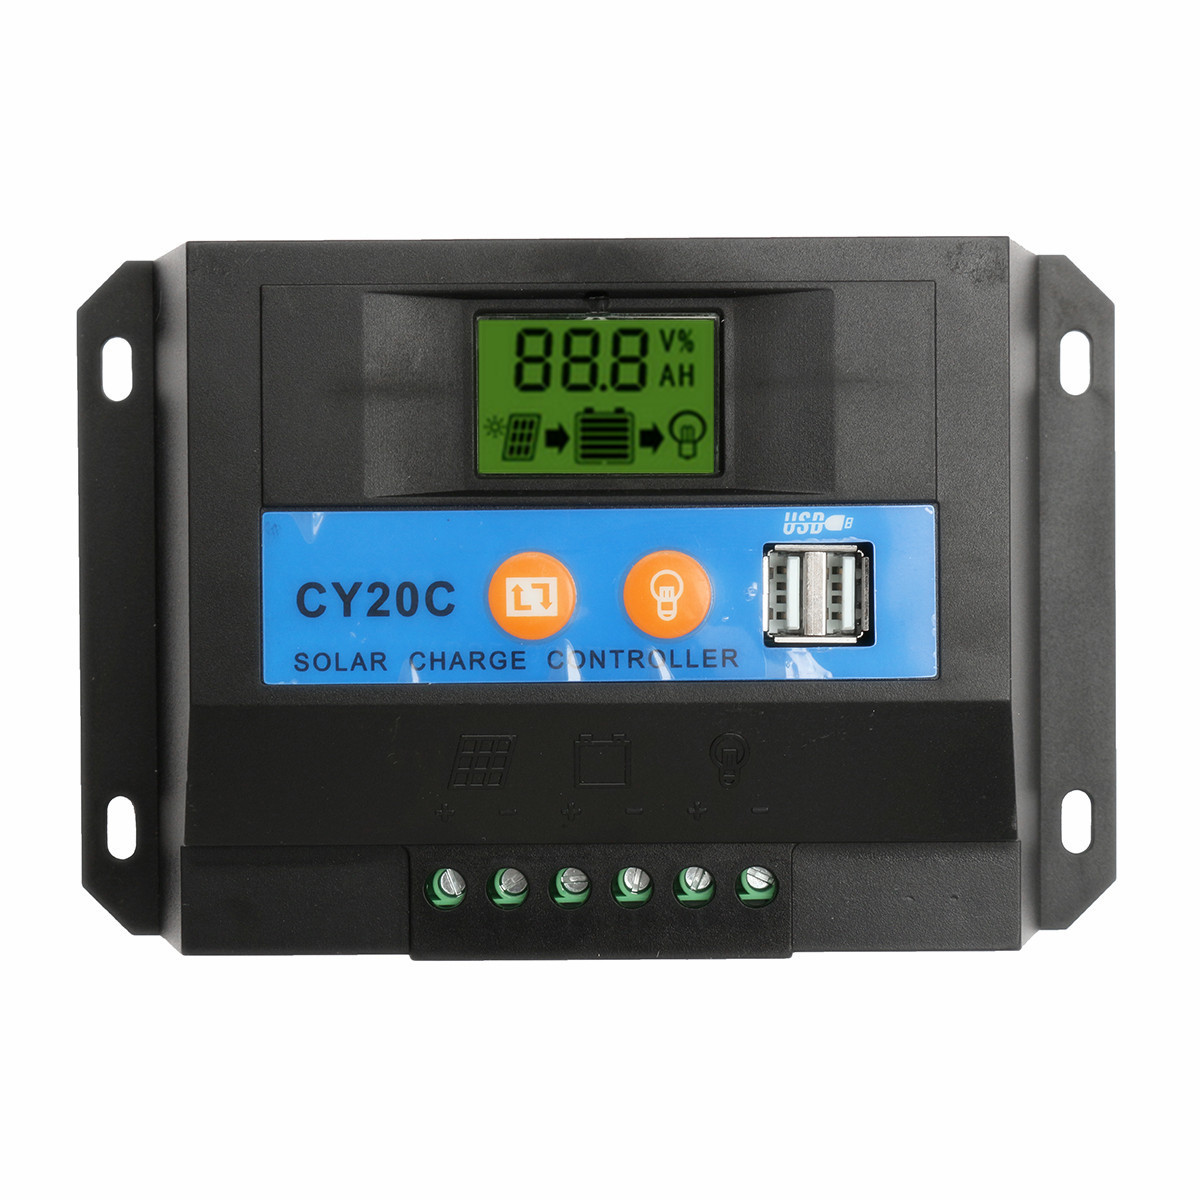 20A 12V/24V LCD Solar Charge Controller Panel Battery Regulator With 2 USB Ports 2